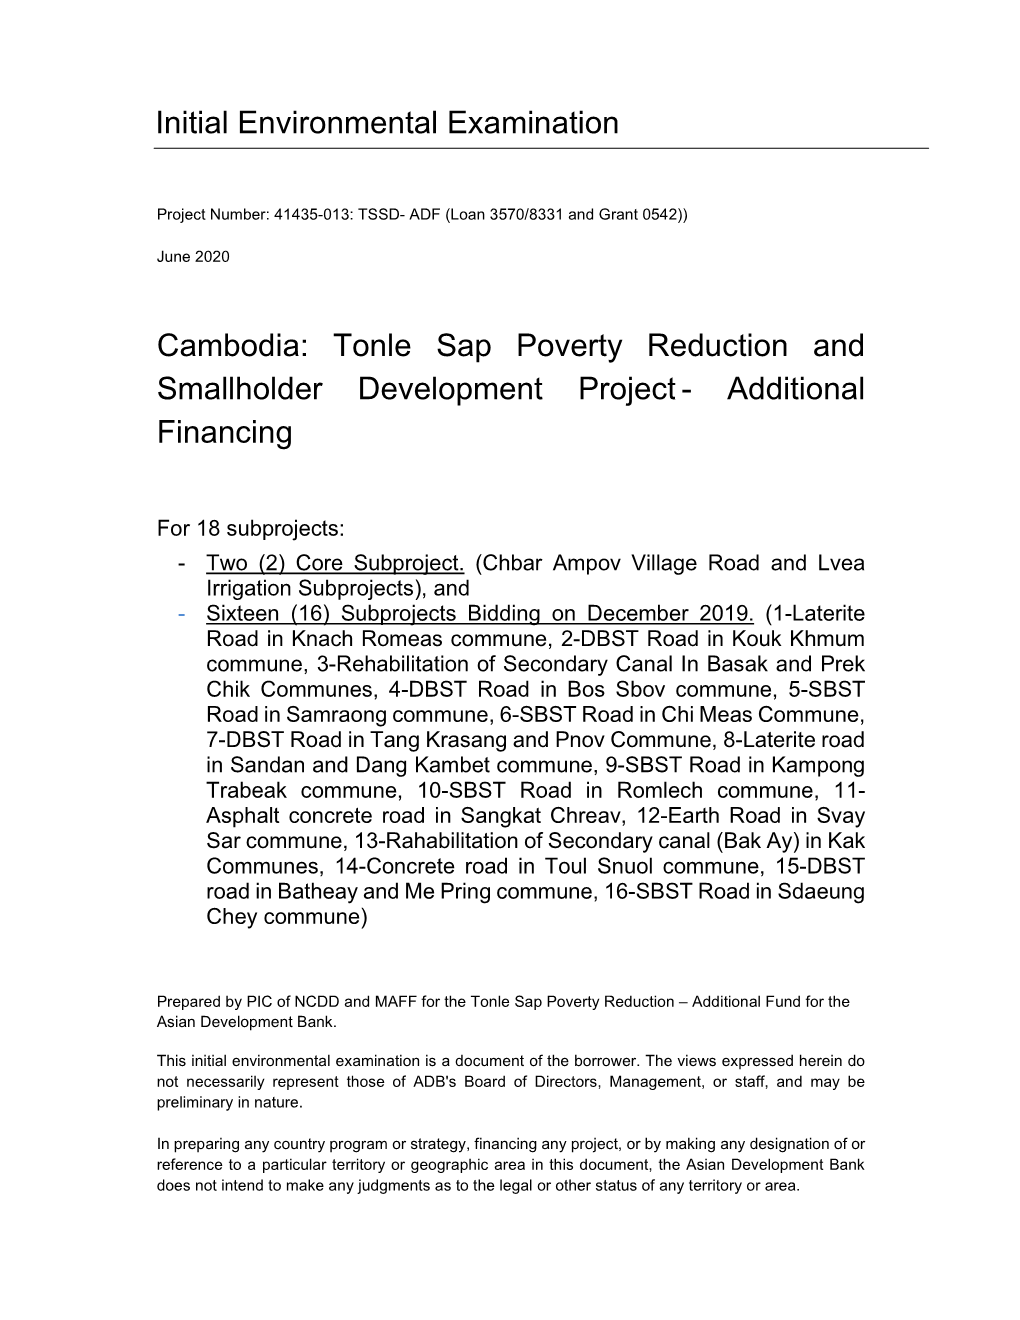 41435-013: Tonle Sap Poverty Reduction and Smallholder